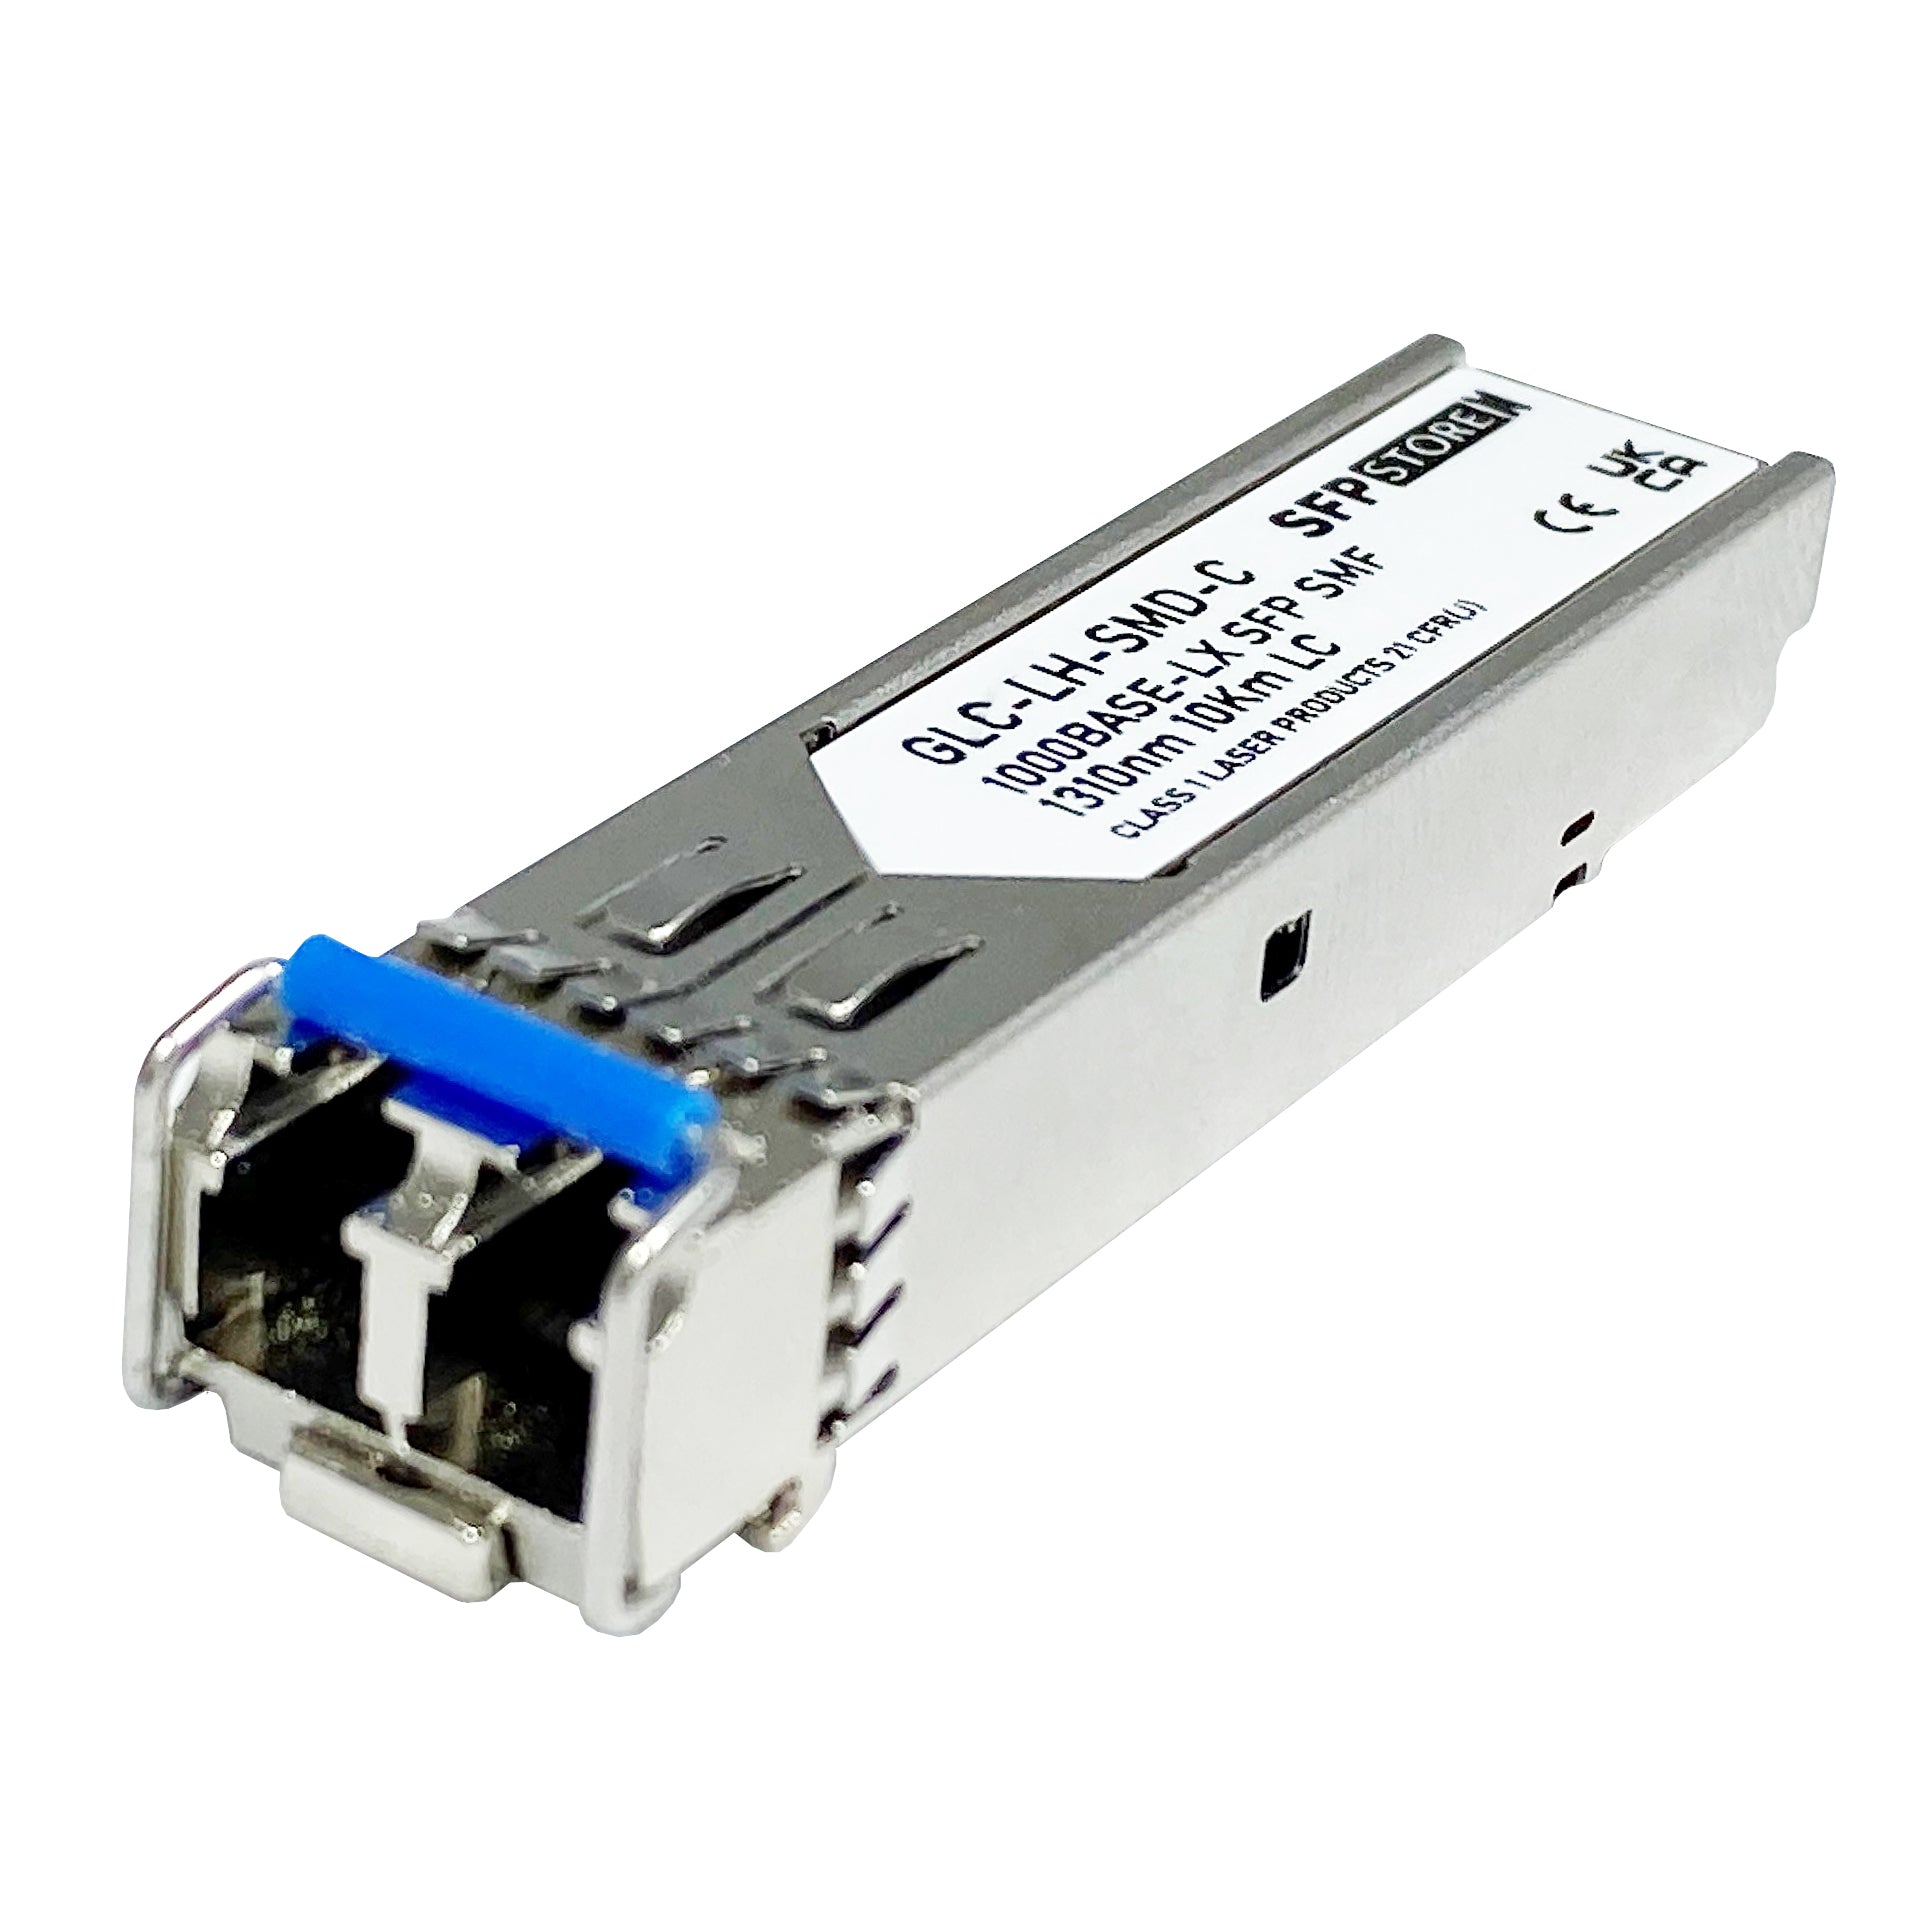 LACGLX-C Linksys Compatible 1G LX SFP LC Transceiver